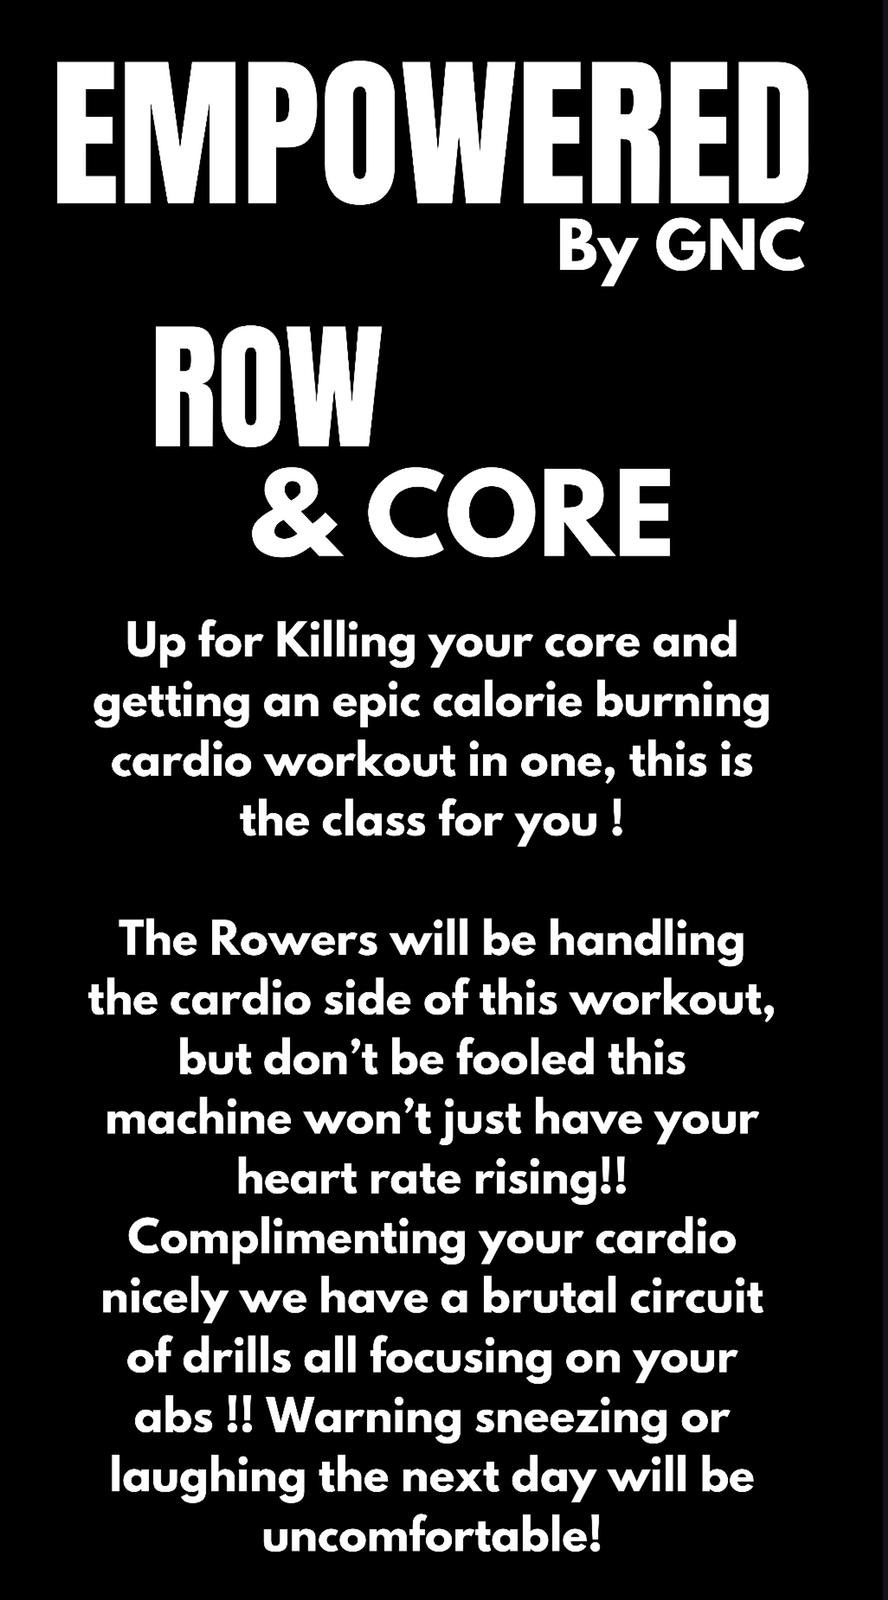 Empowered Row and Core by GNC